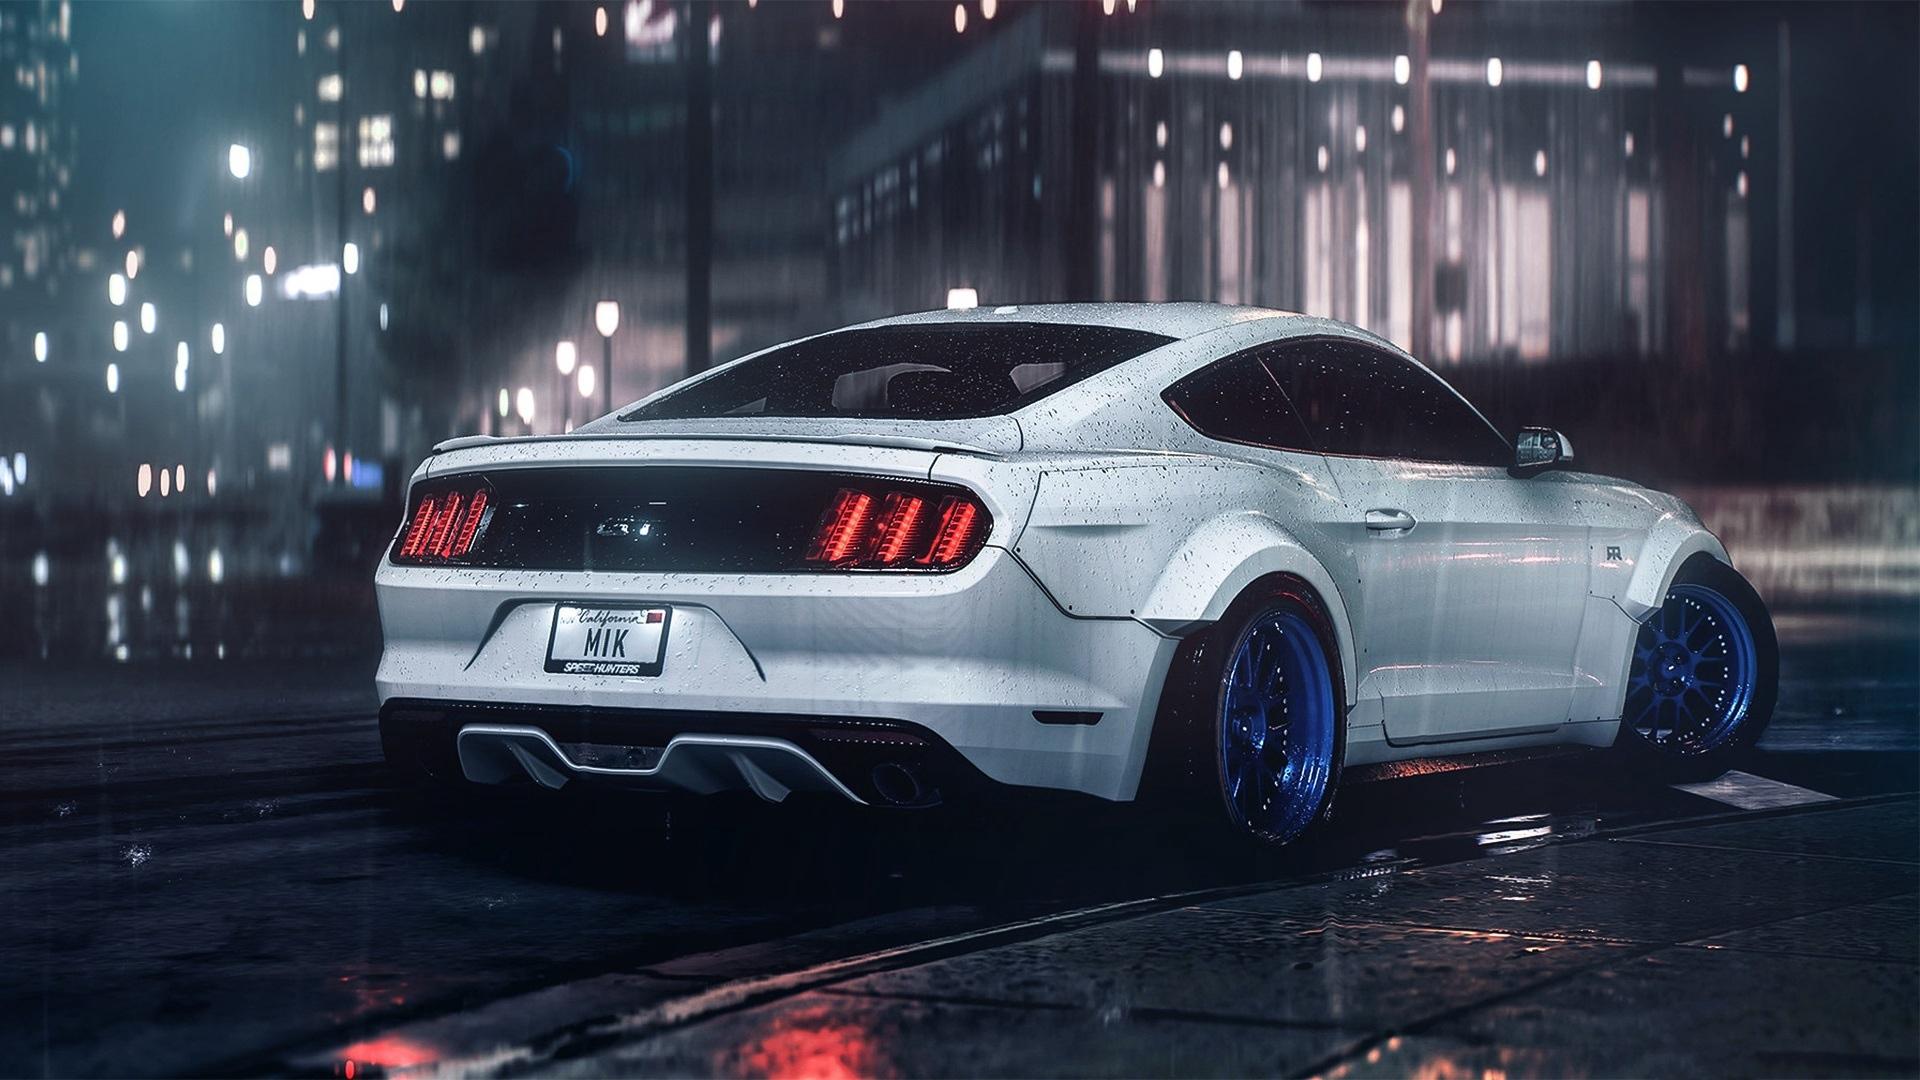 Download wallpaper 1920x1080 ford, mustang, gt, rtr HD